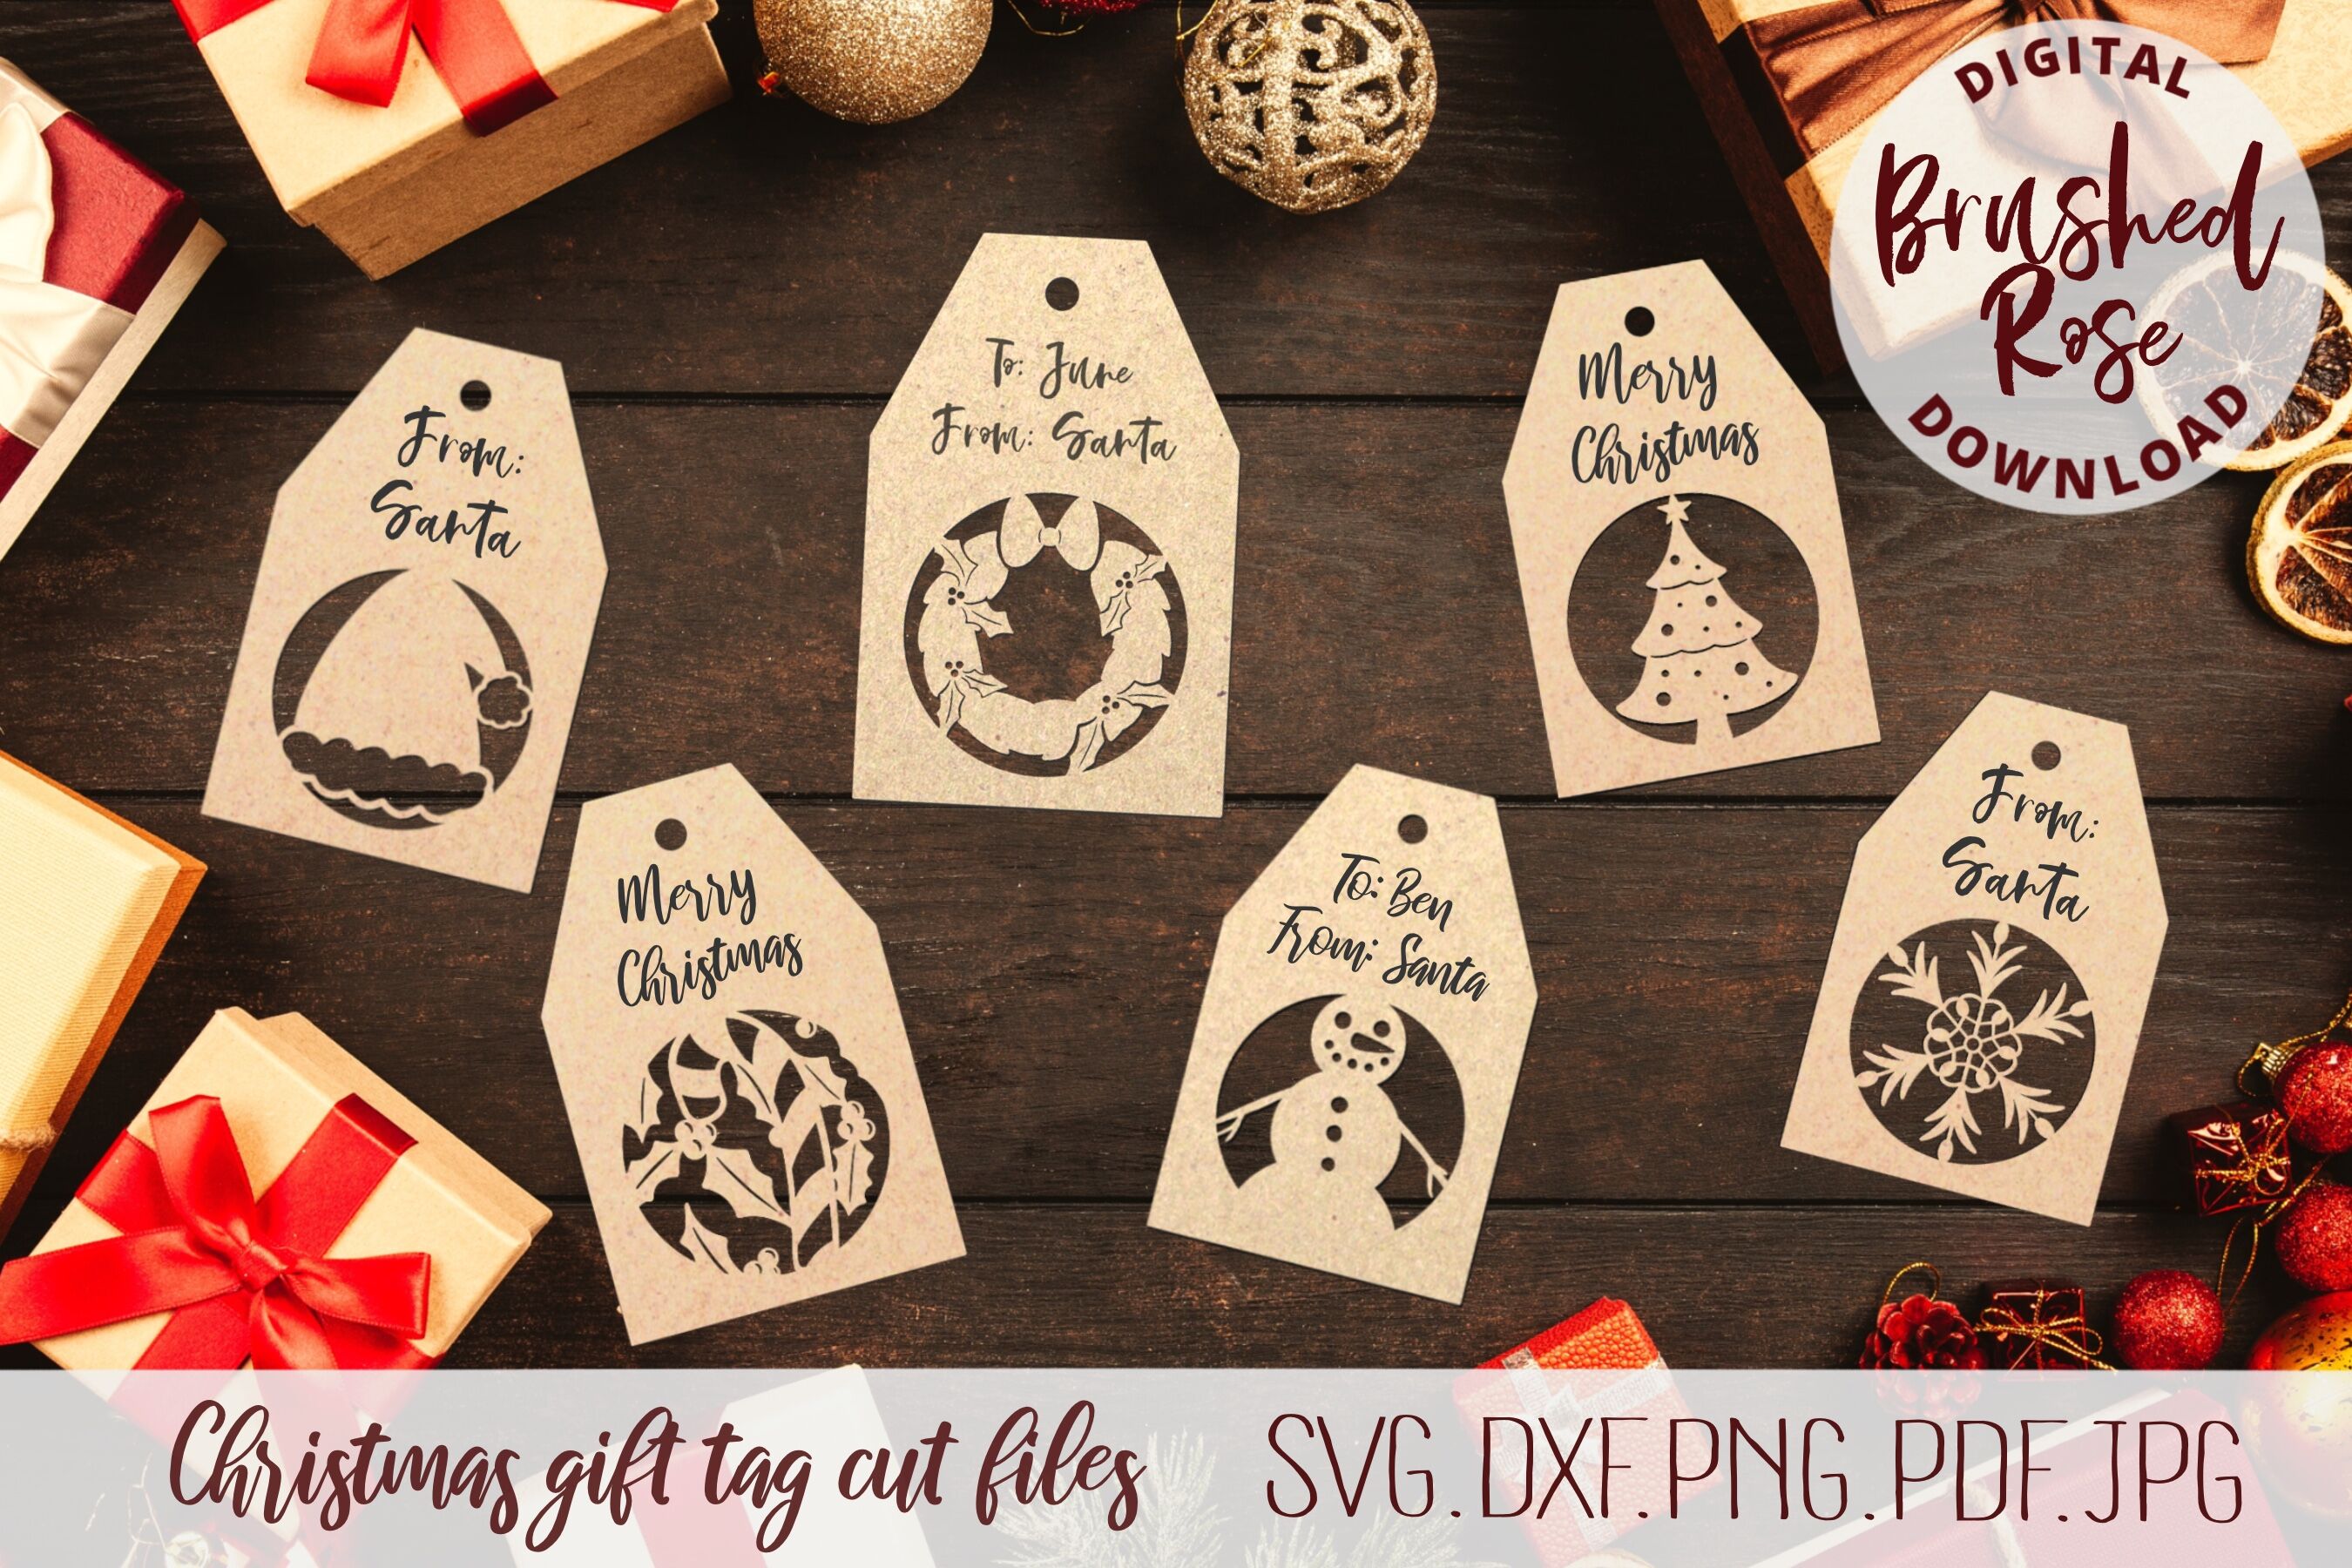 Christmas gift tags cut file svg By Brushed Rose Digital | TheHungryJPEG